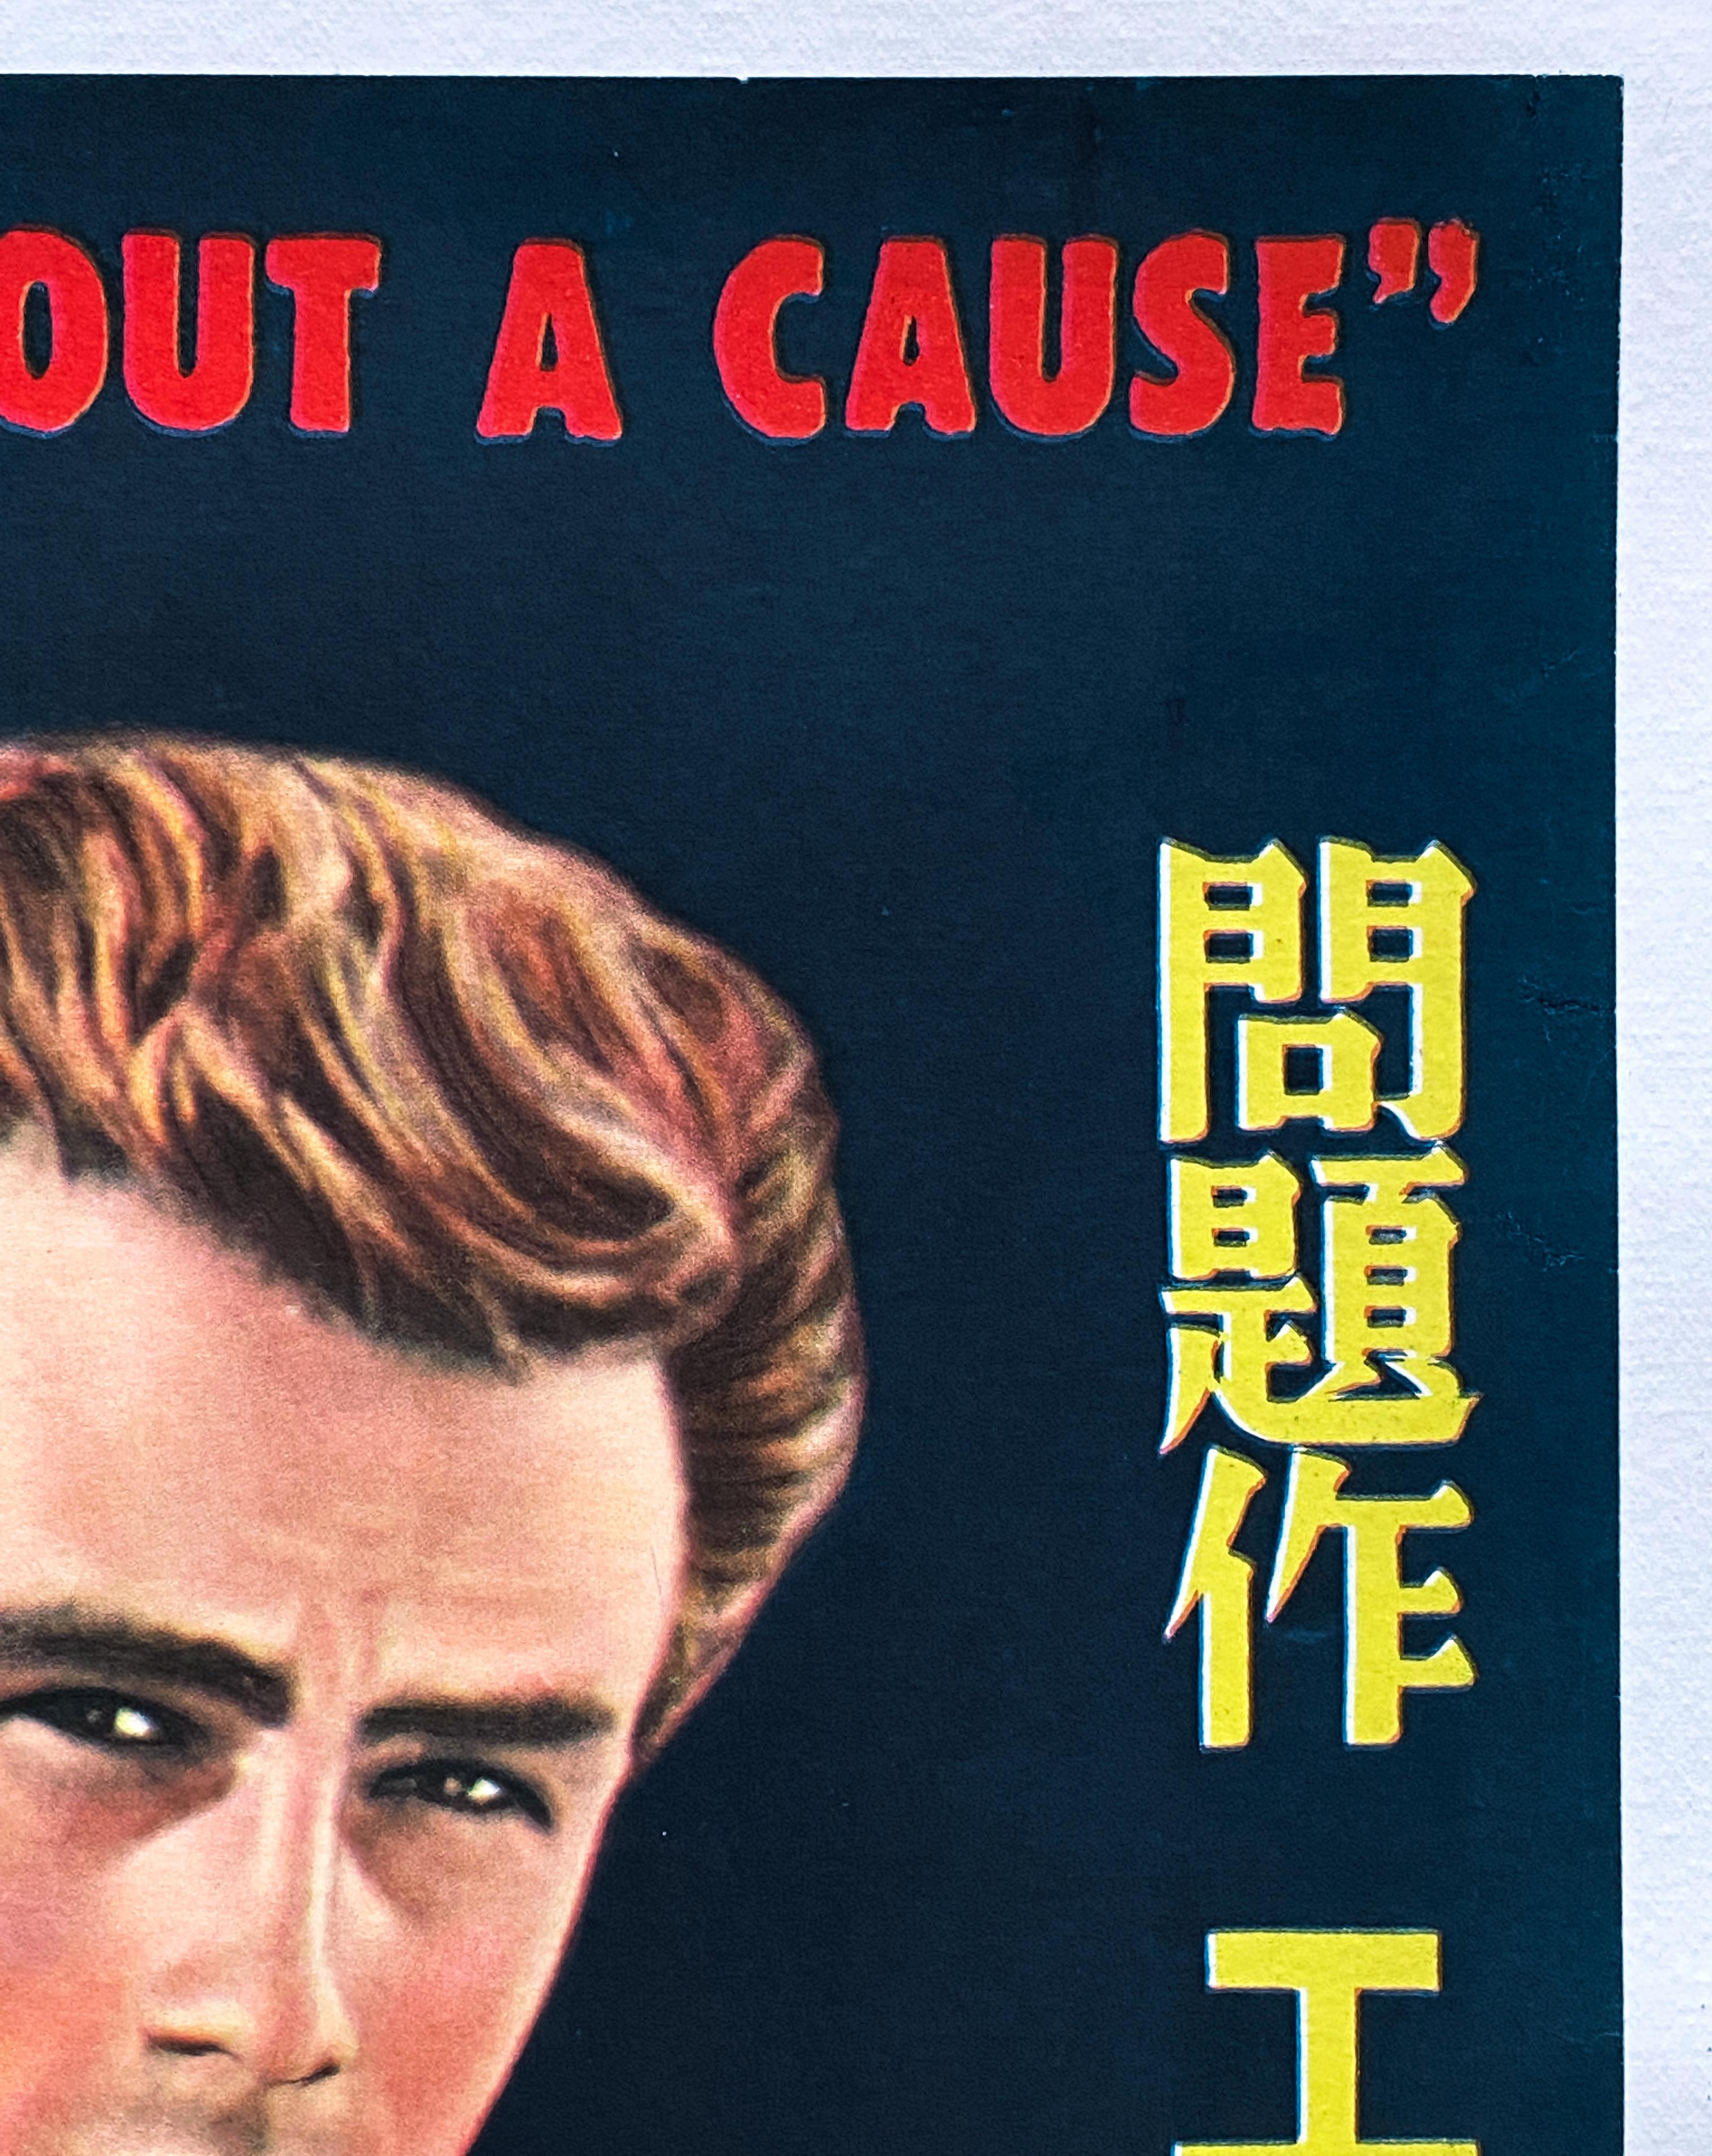 Post-Modern James Dean 'Rebel Without A Cause' Original Vintage Movie Poster, Japanese, 1956 For Sale